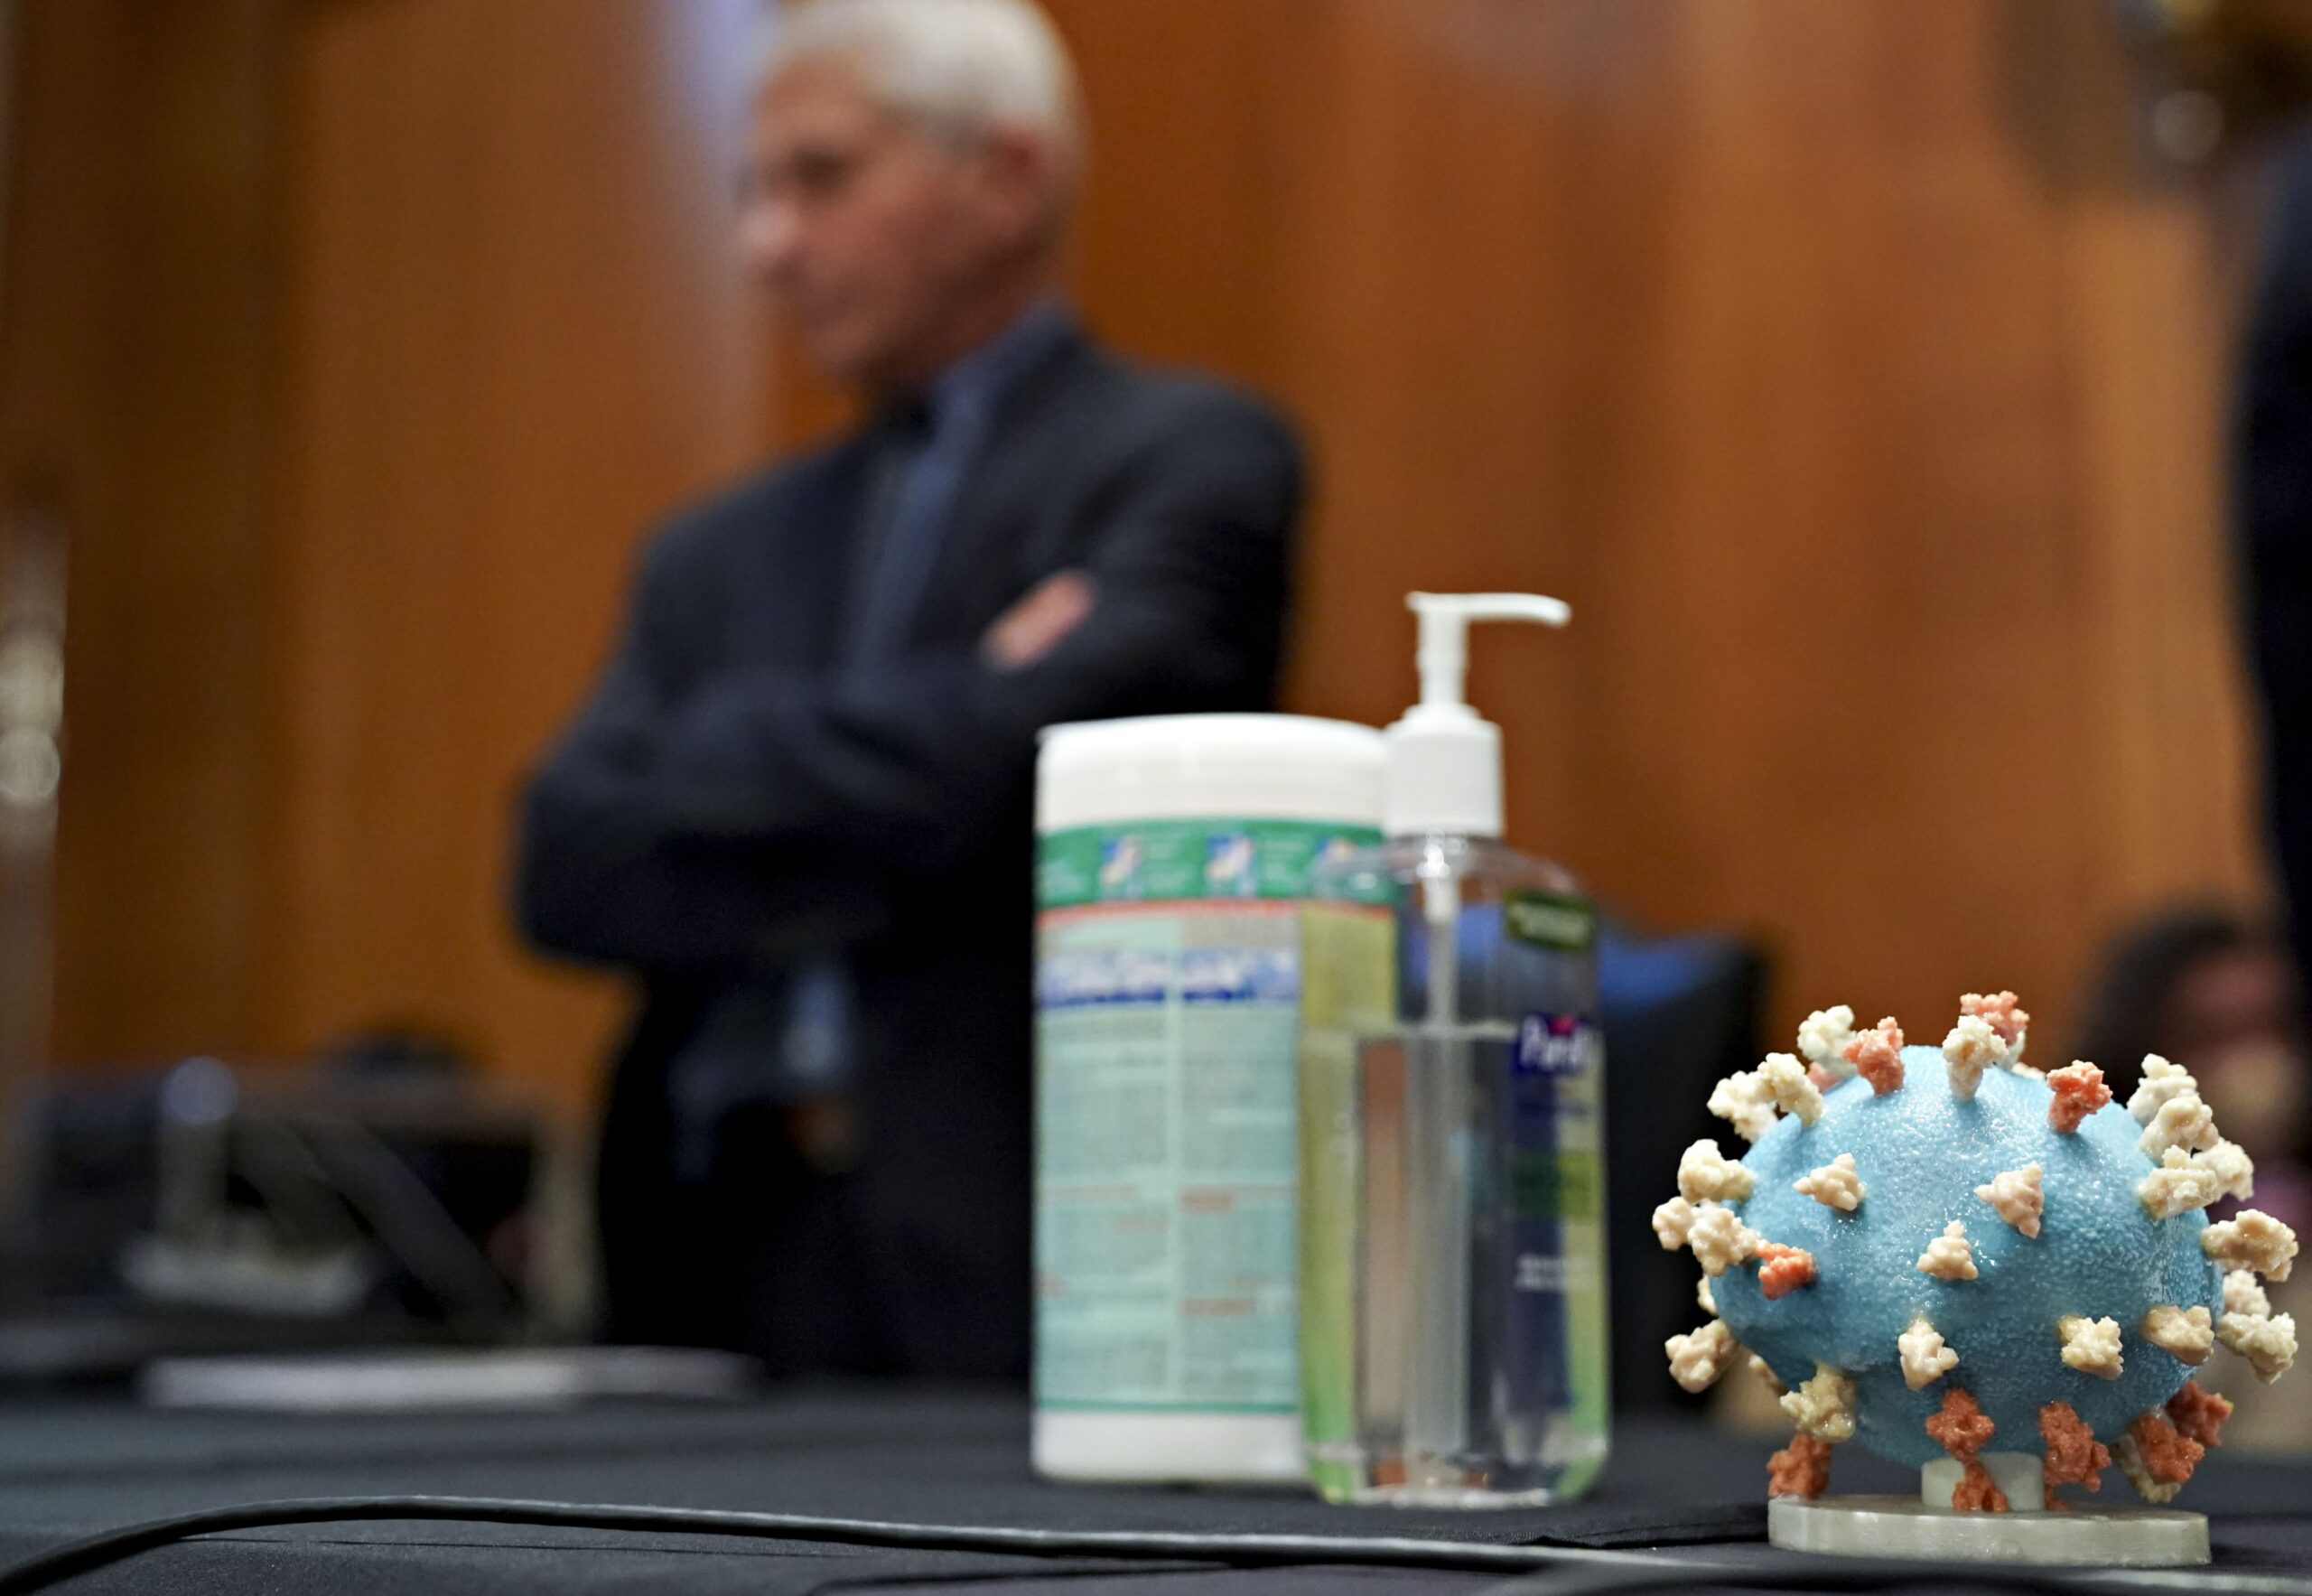 Hand sanitizer and coronavirus model on a table with Fauci in background